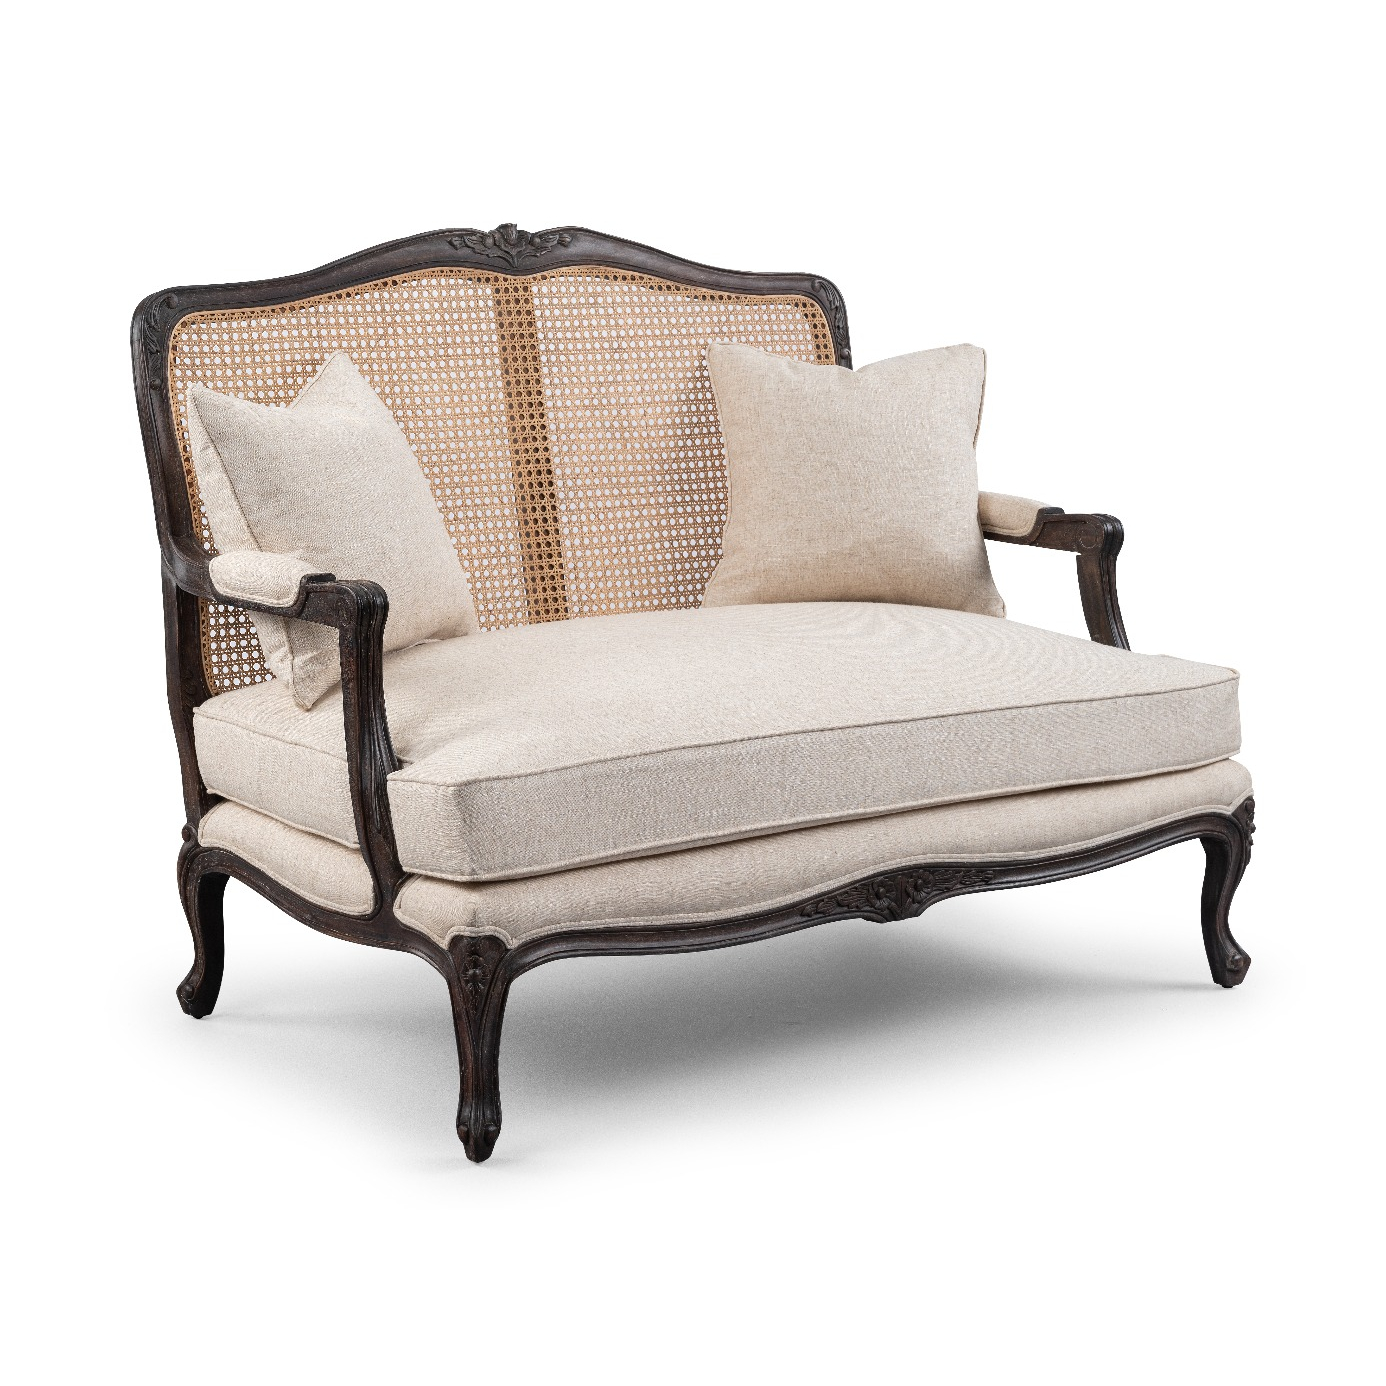 Hombre General por inadvertencia Louis French 2 Seater Sofa with Rattan Back | French Style Sofa | French  Furniture | Upholstered French Sofa